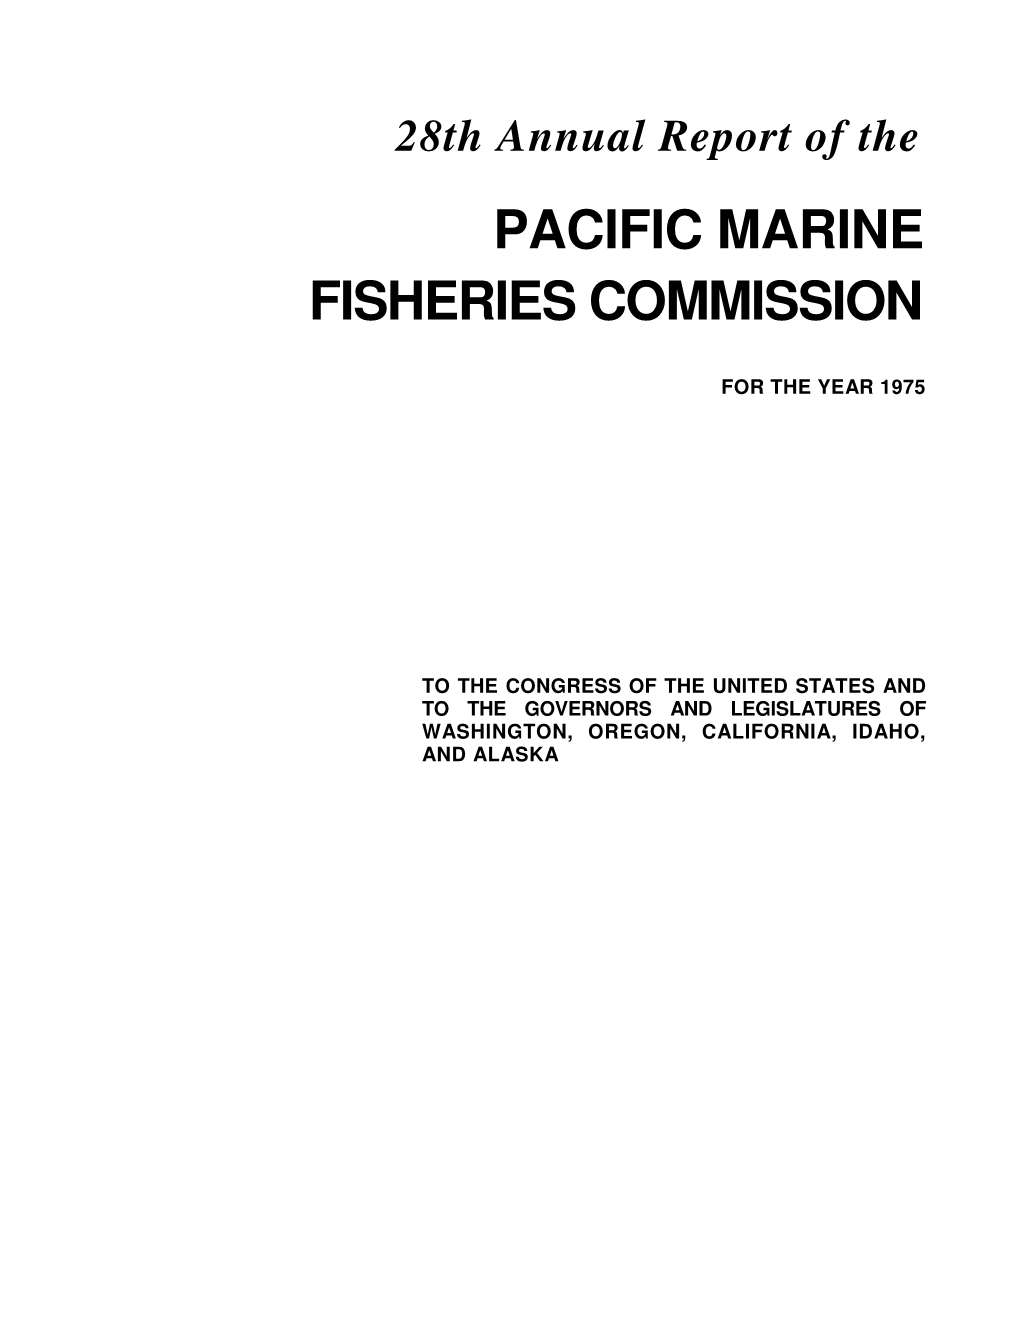 Pacific Marine Fisheries Commission